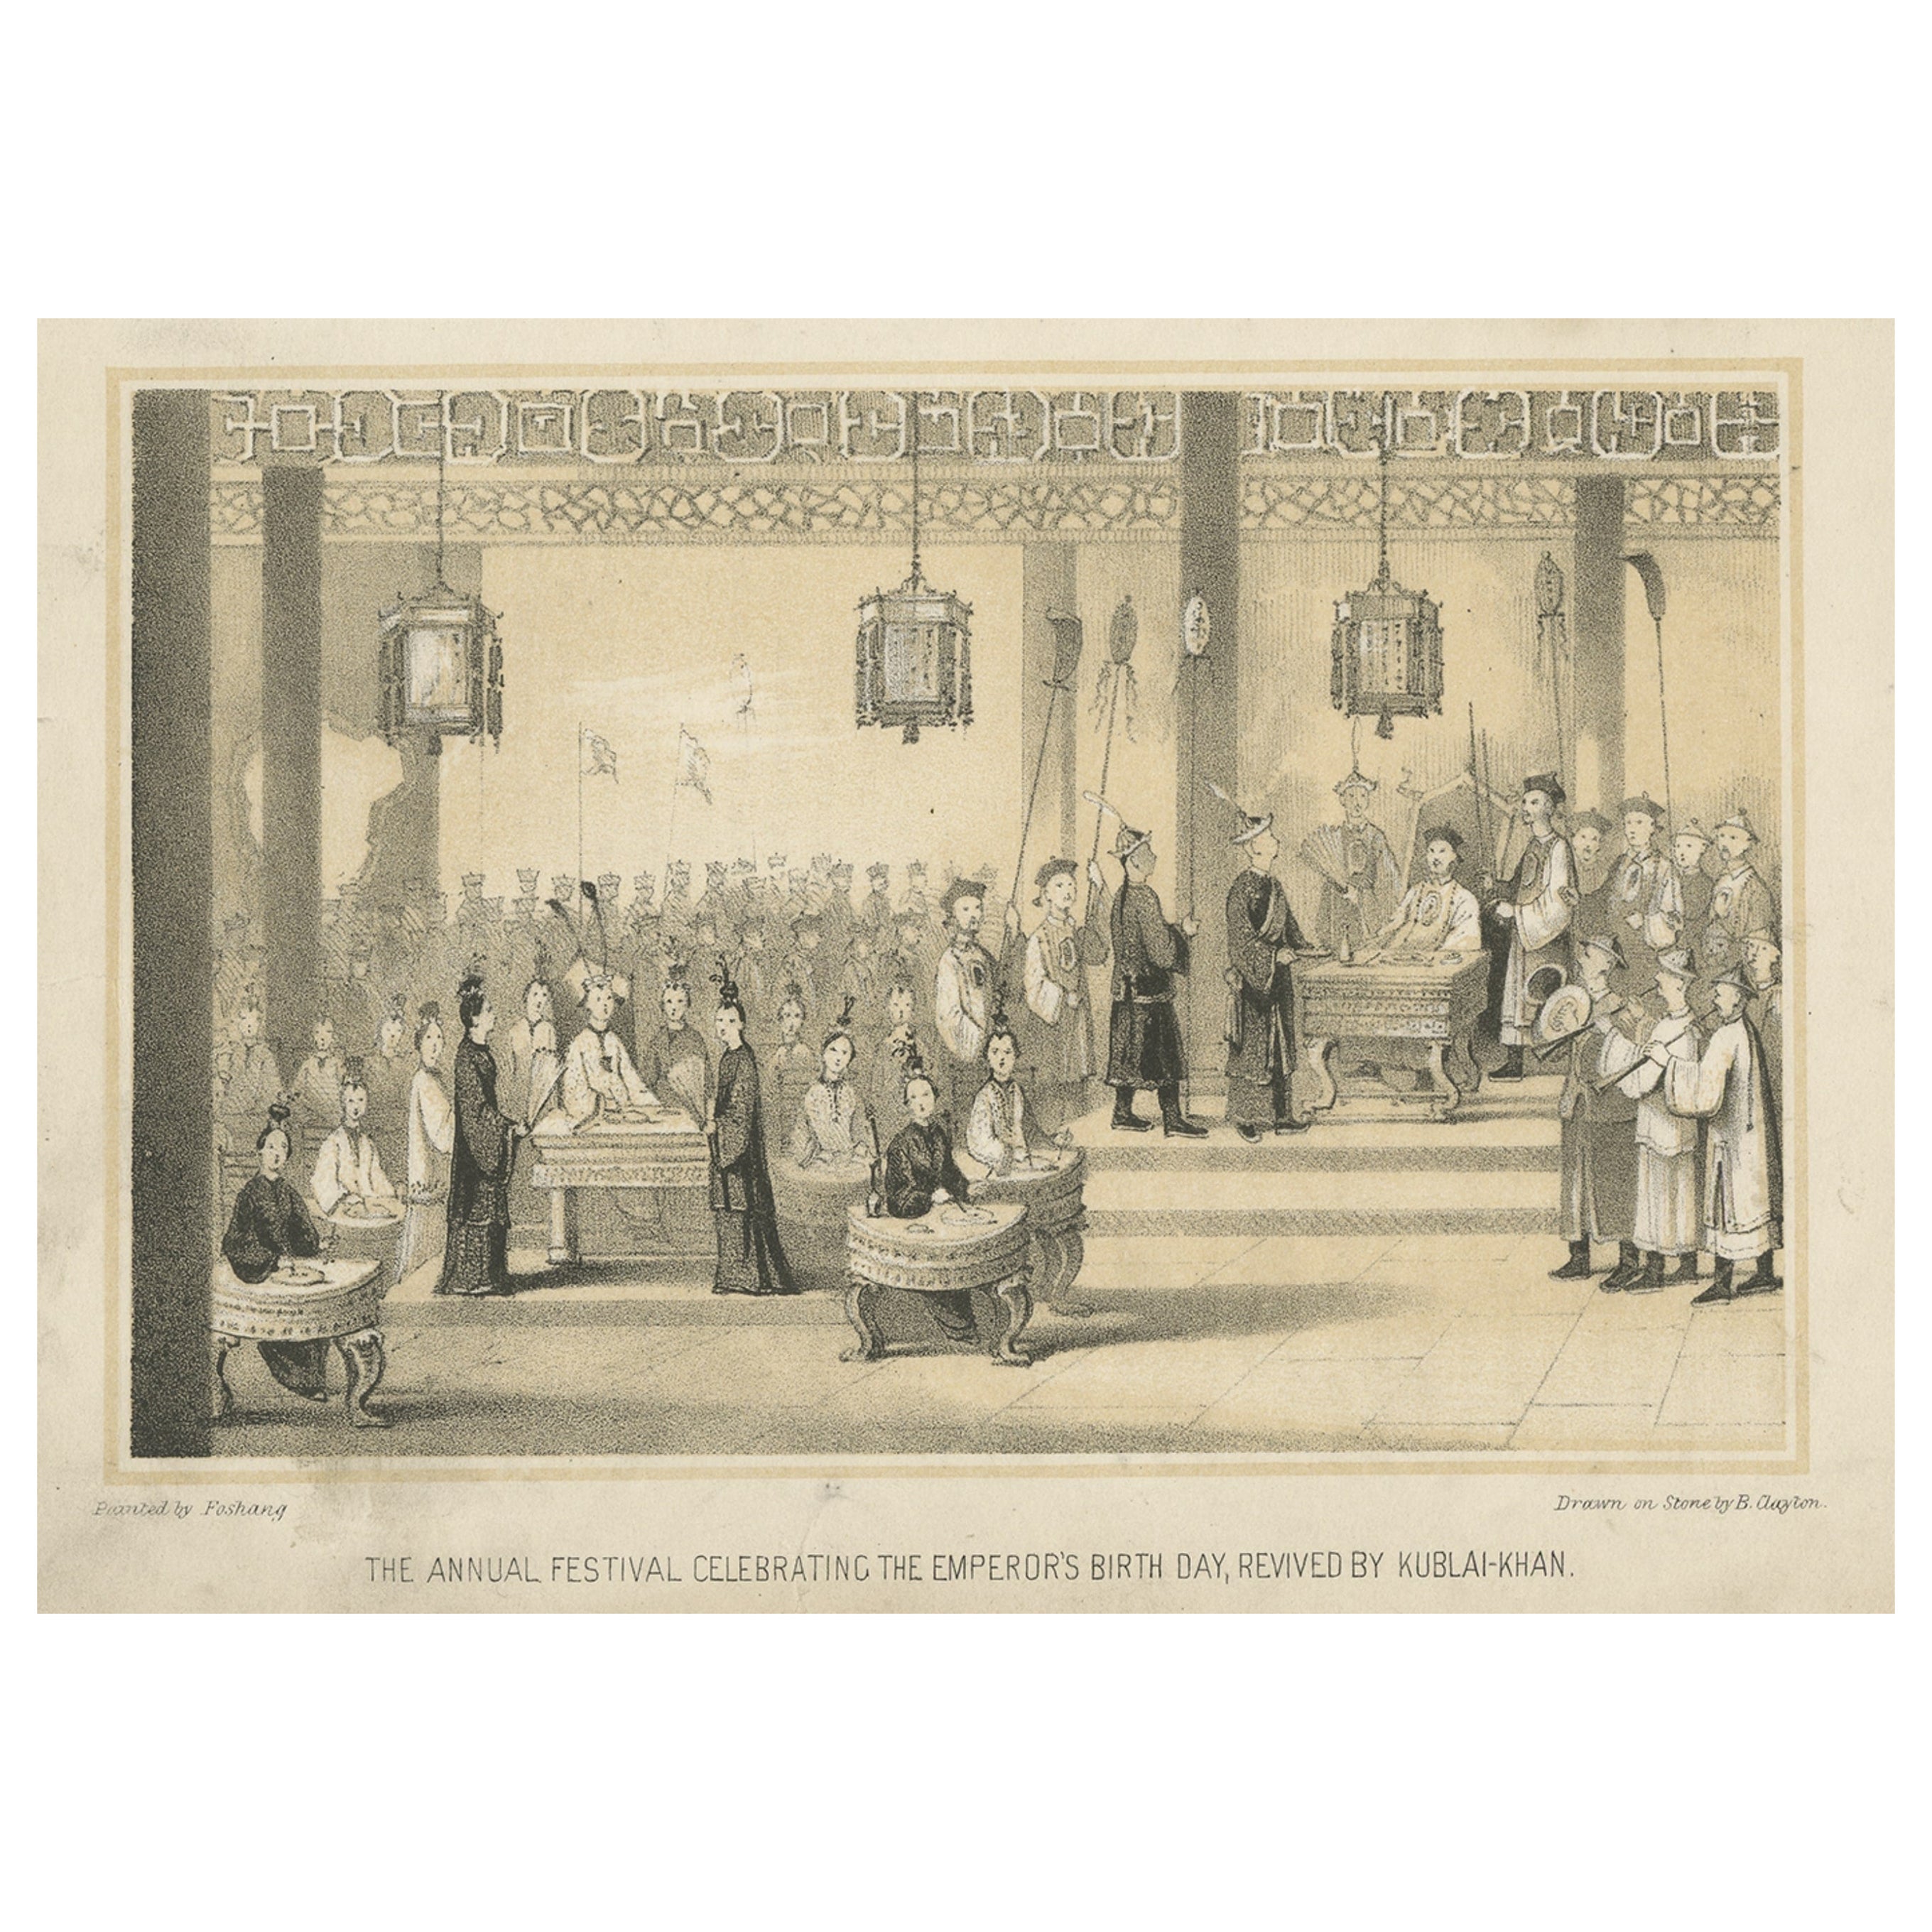 Antique Print of the Festival Celebrating the Emperor's Birthday in China, 1843